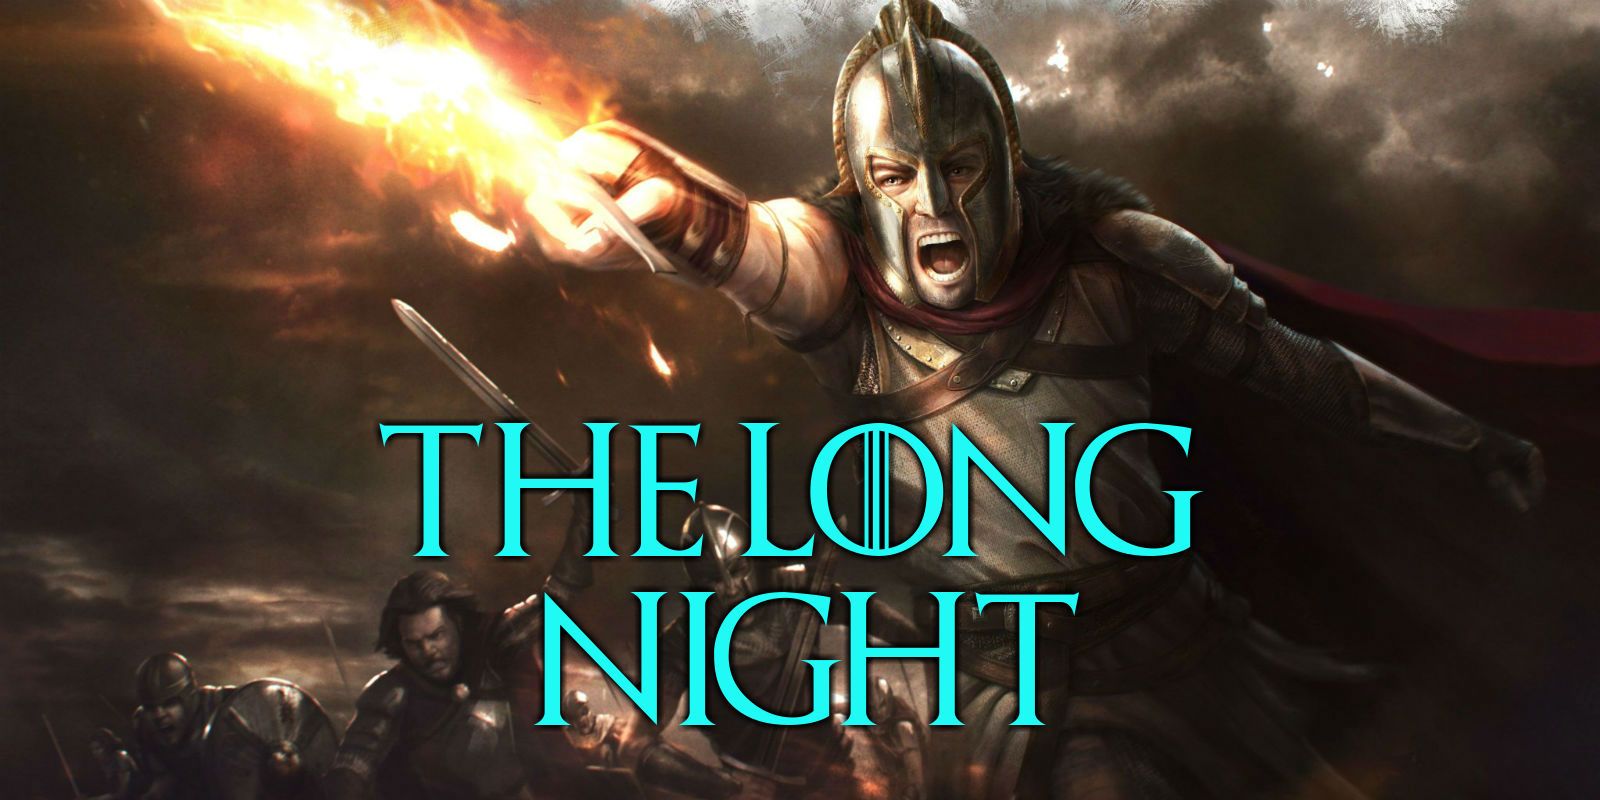 What Is the Long Night In Game of Thrones - Prequel Setting and Timeline